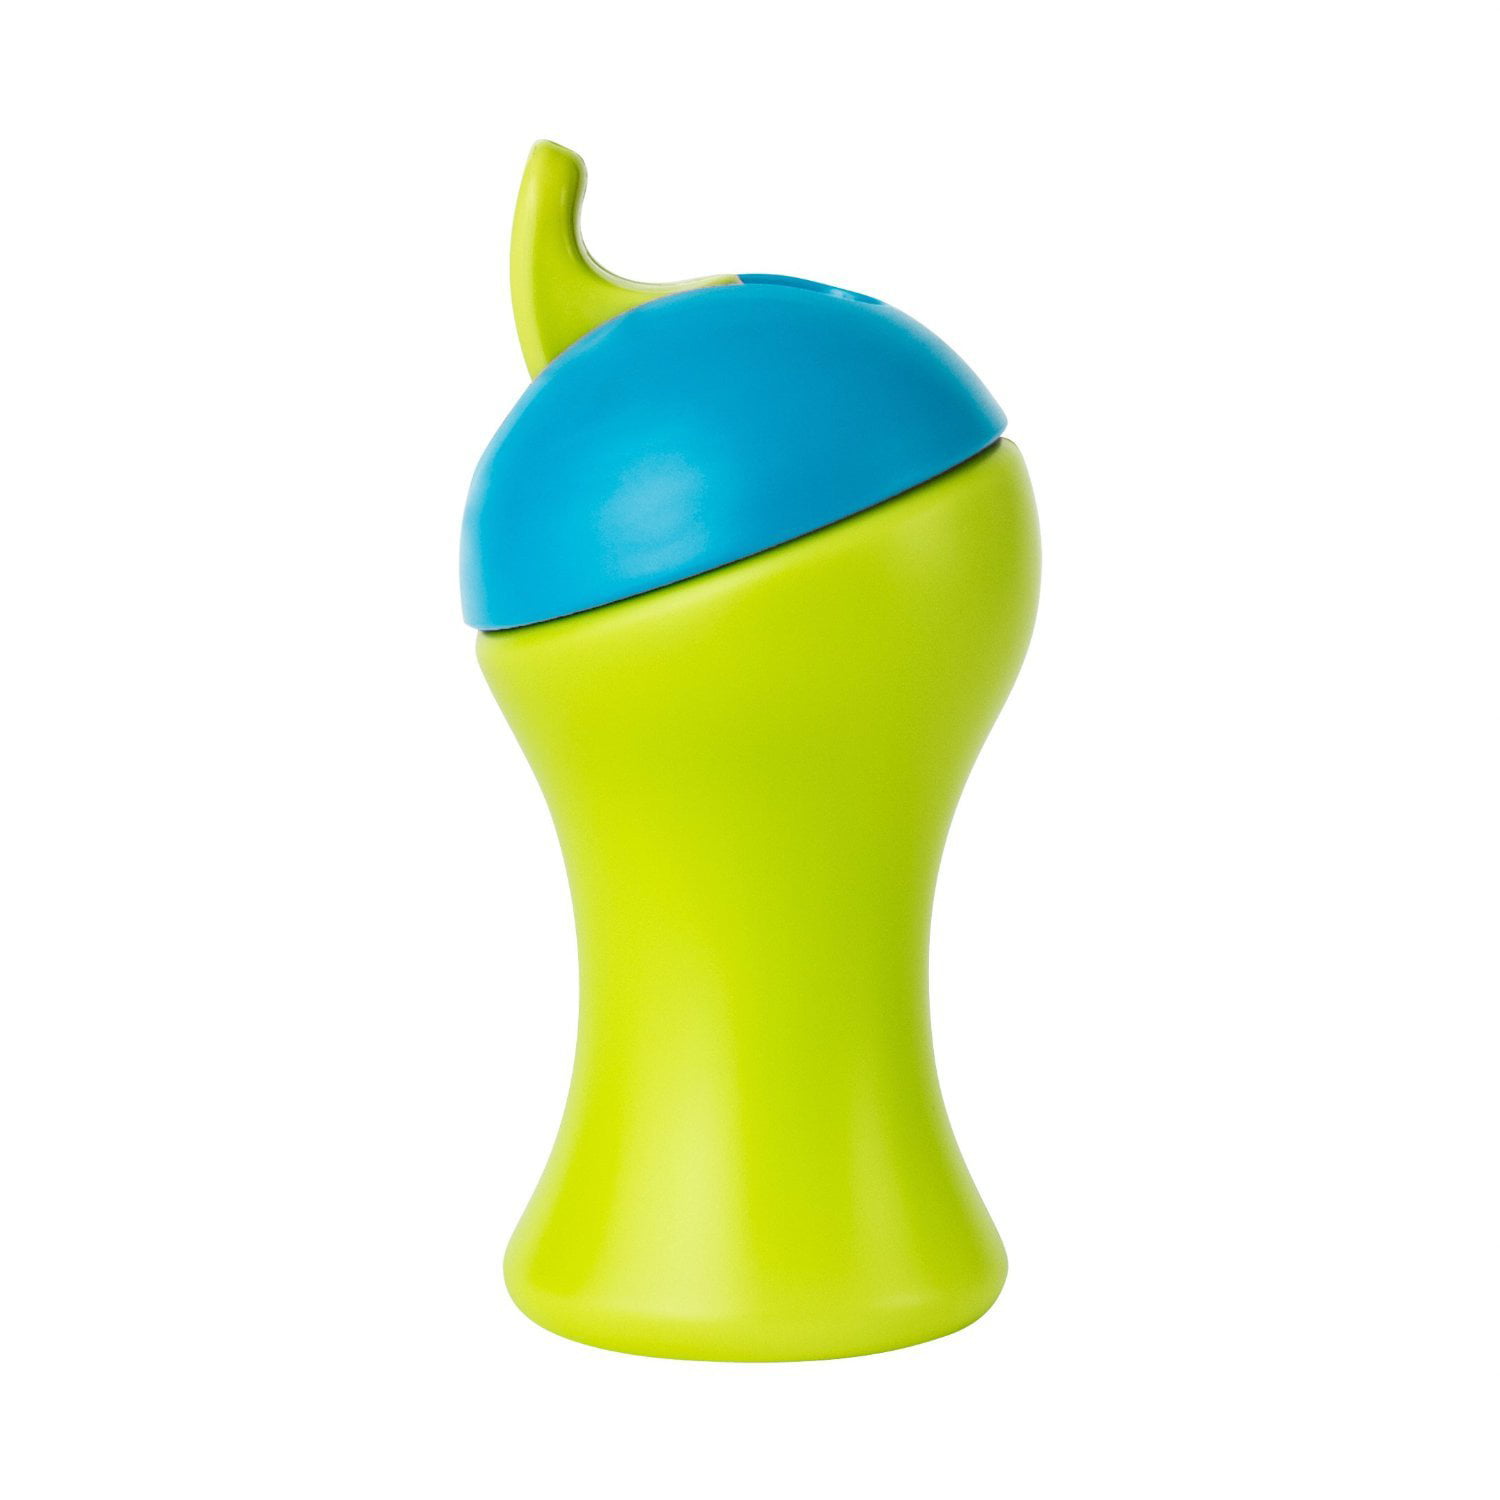 SWIG Silicone Straw Cup